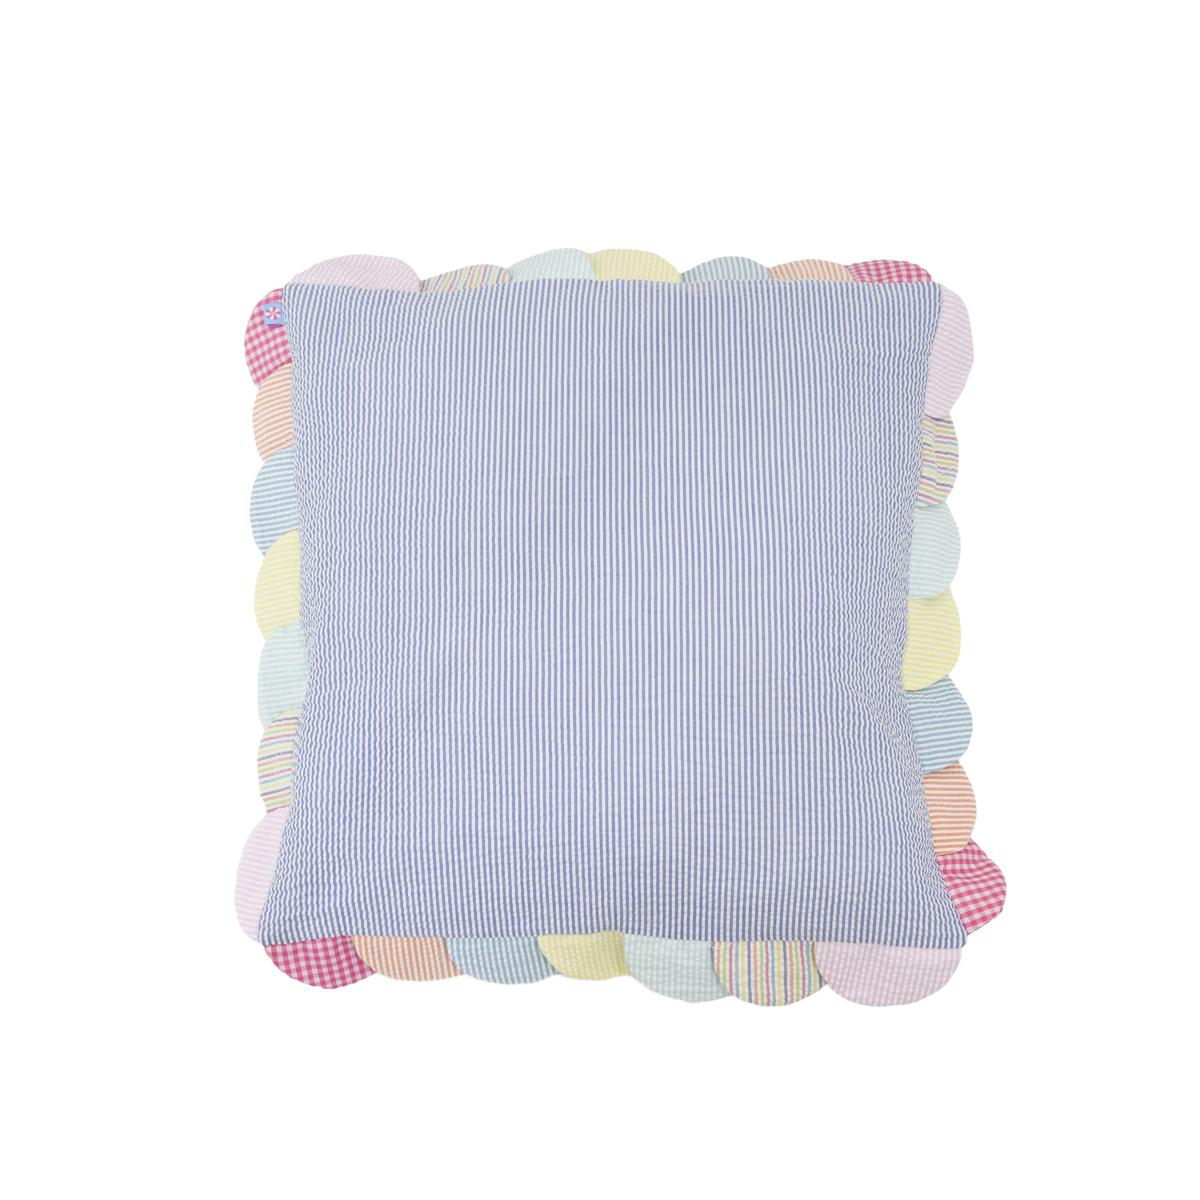 Scallop Pillow Cases